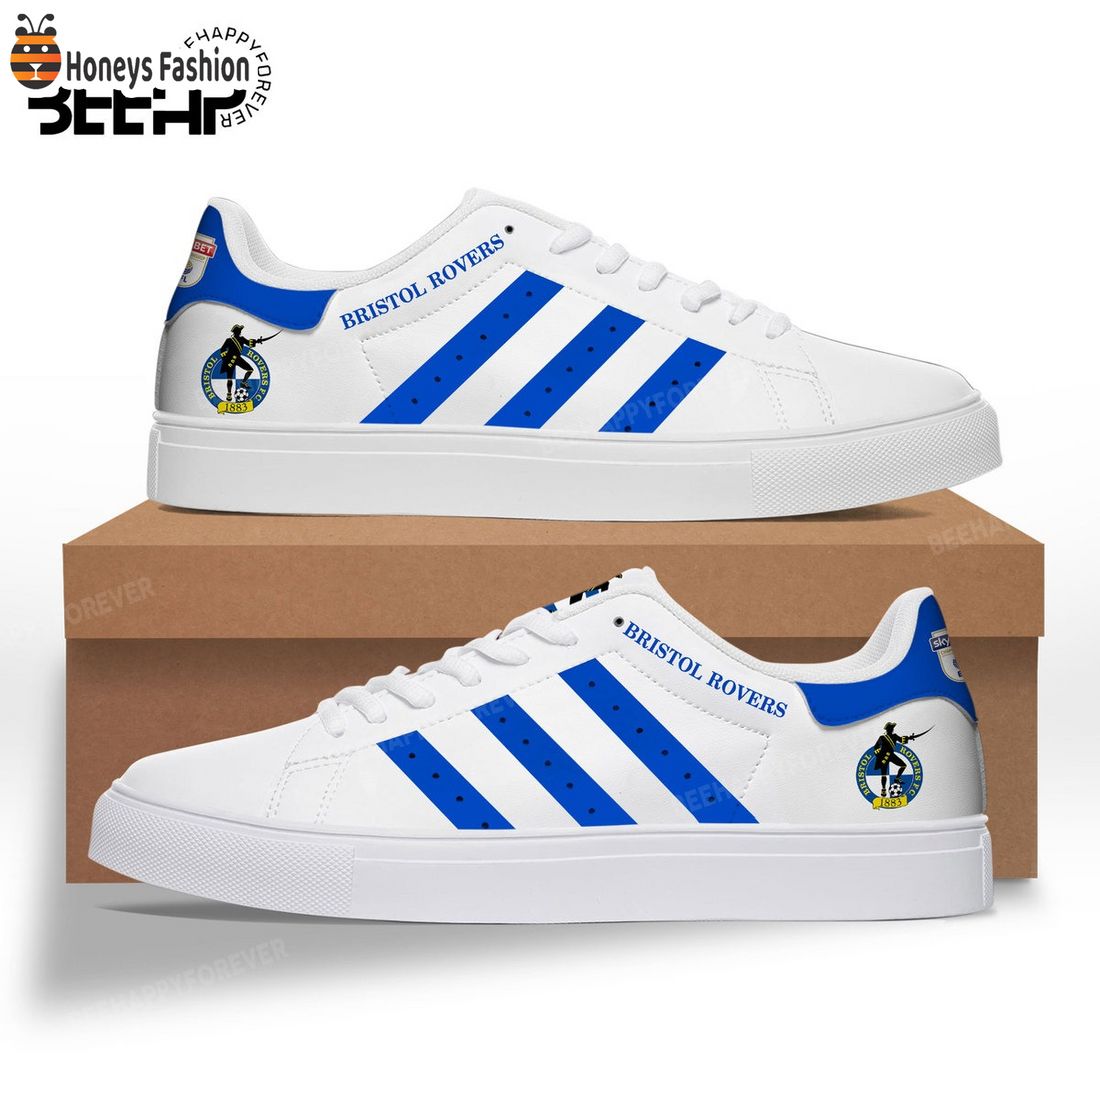 Bristol Rovers Adidas Stan Smith Trainers